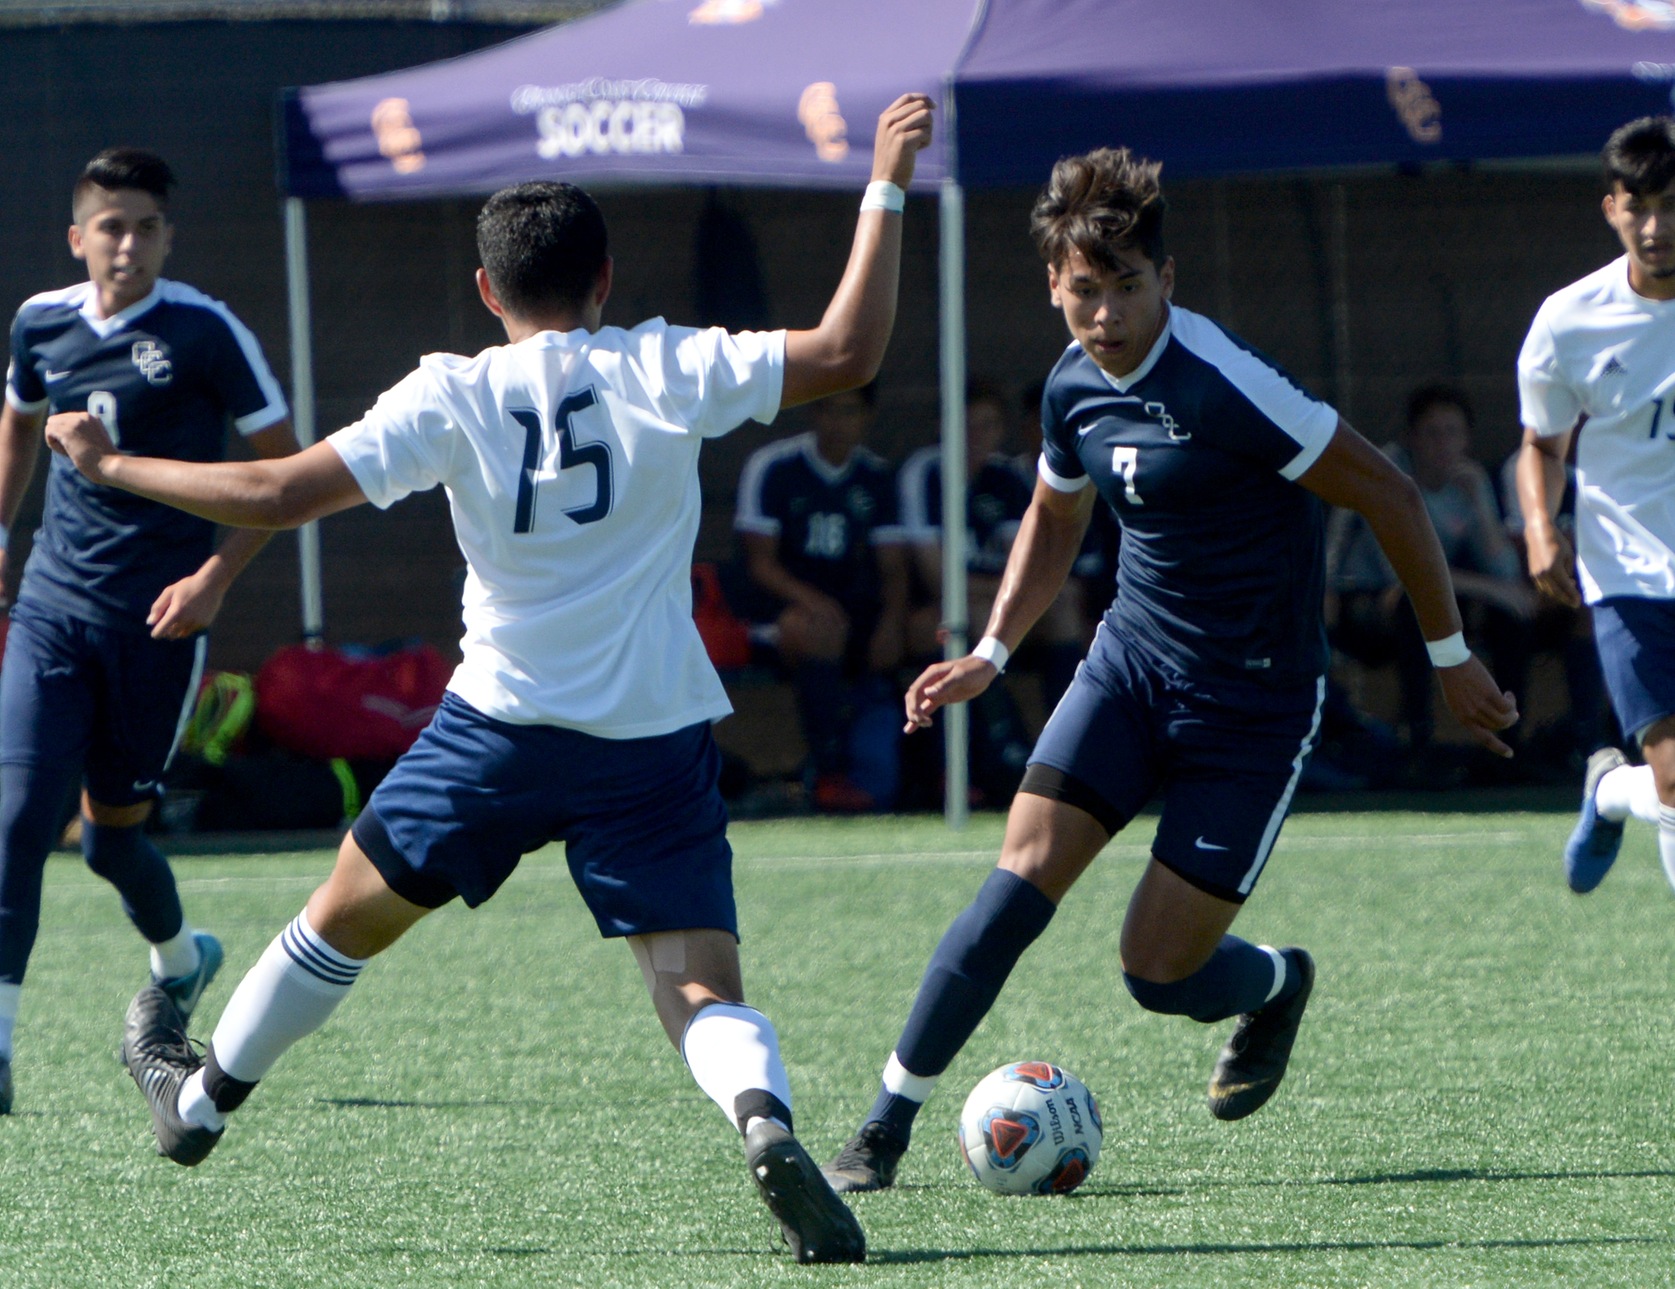 Pirates grind out 2-0 win over Southwestern